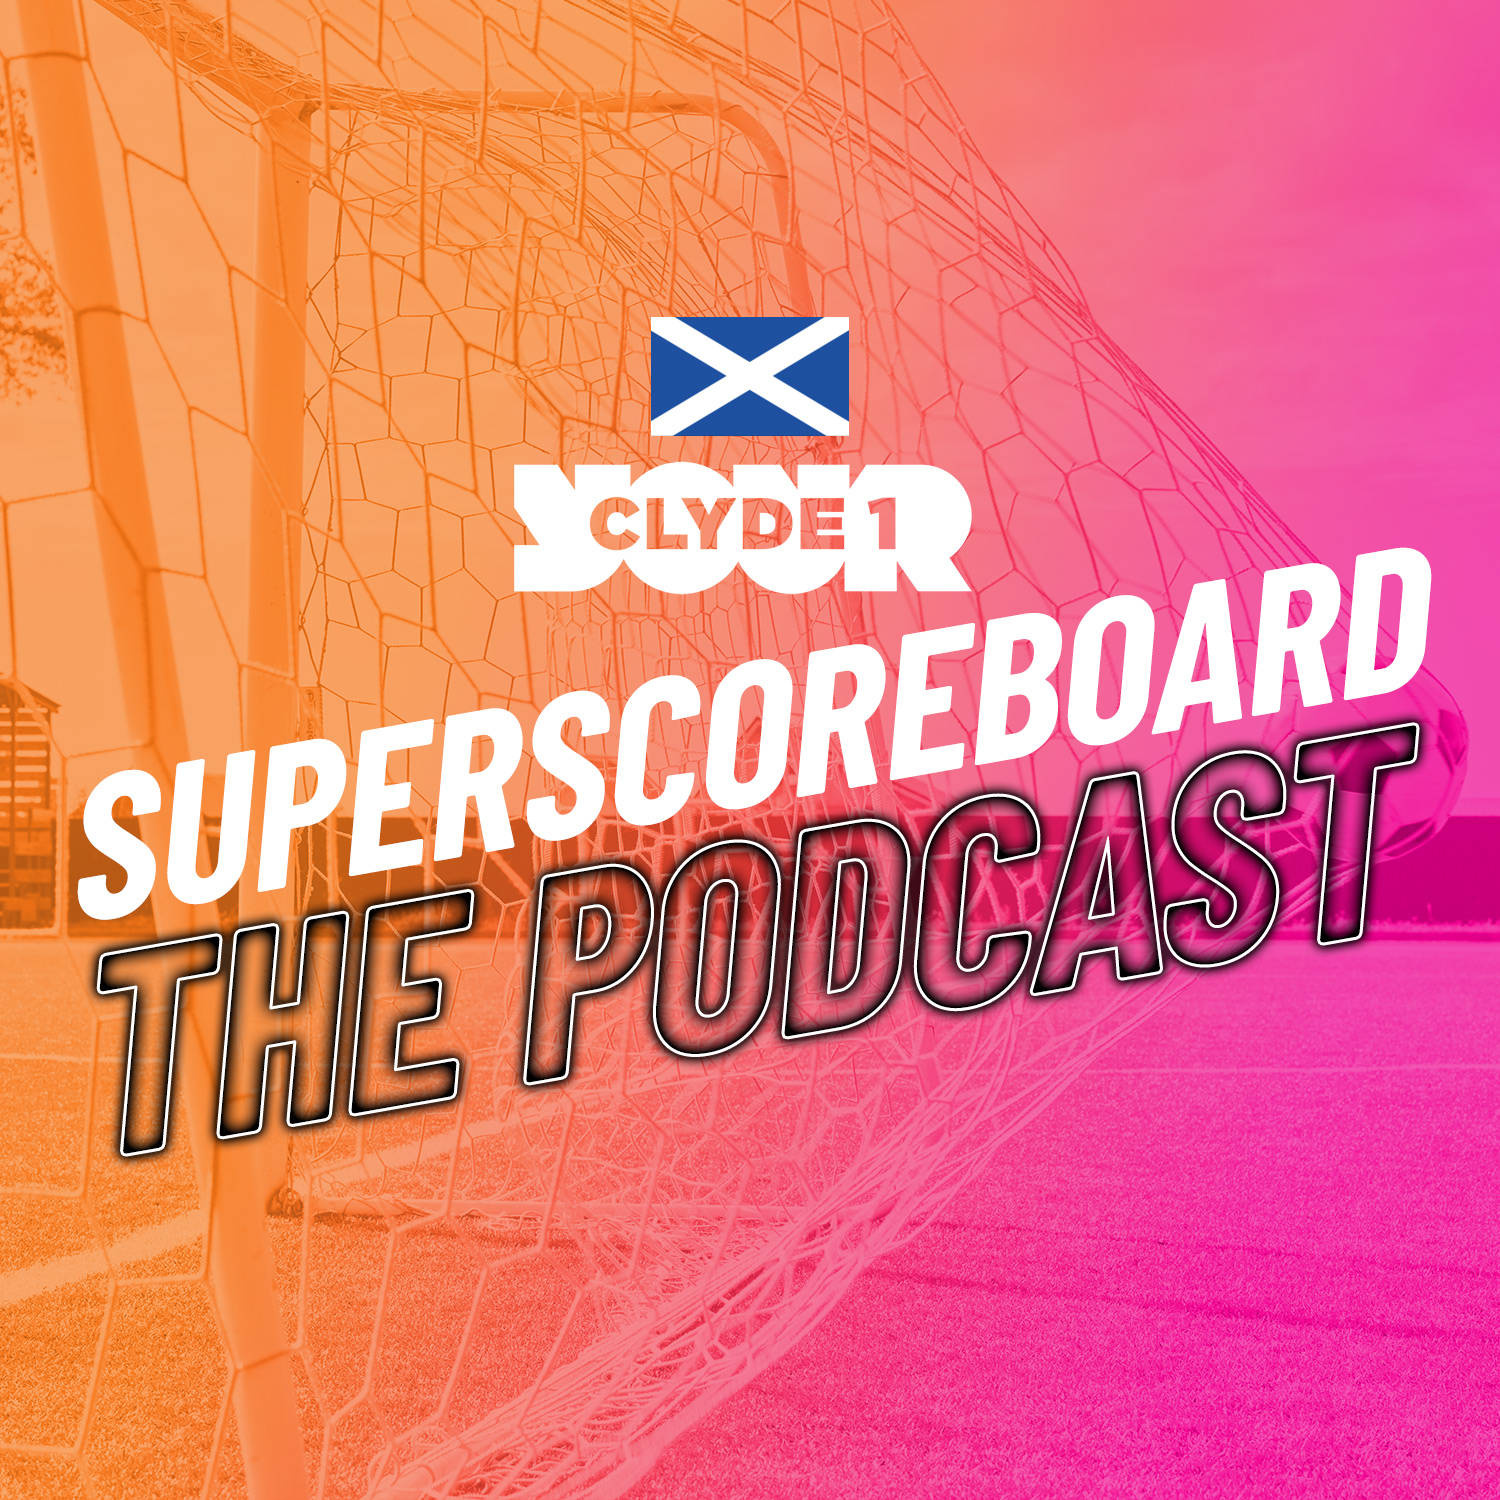 Monday 4th March Clyde 1 Superscoreboard